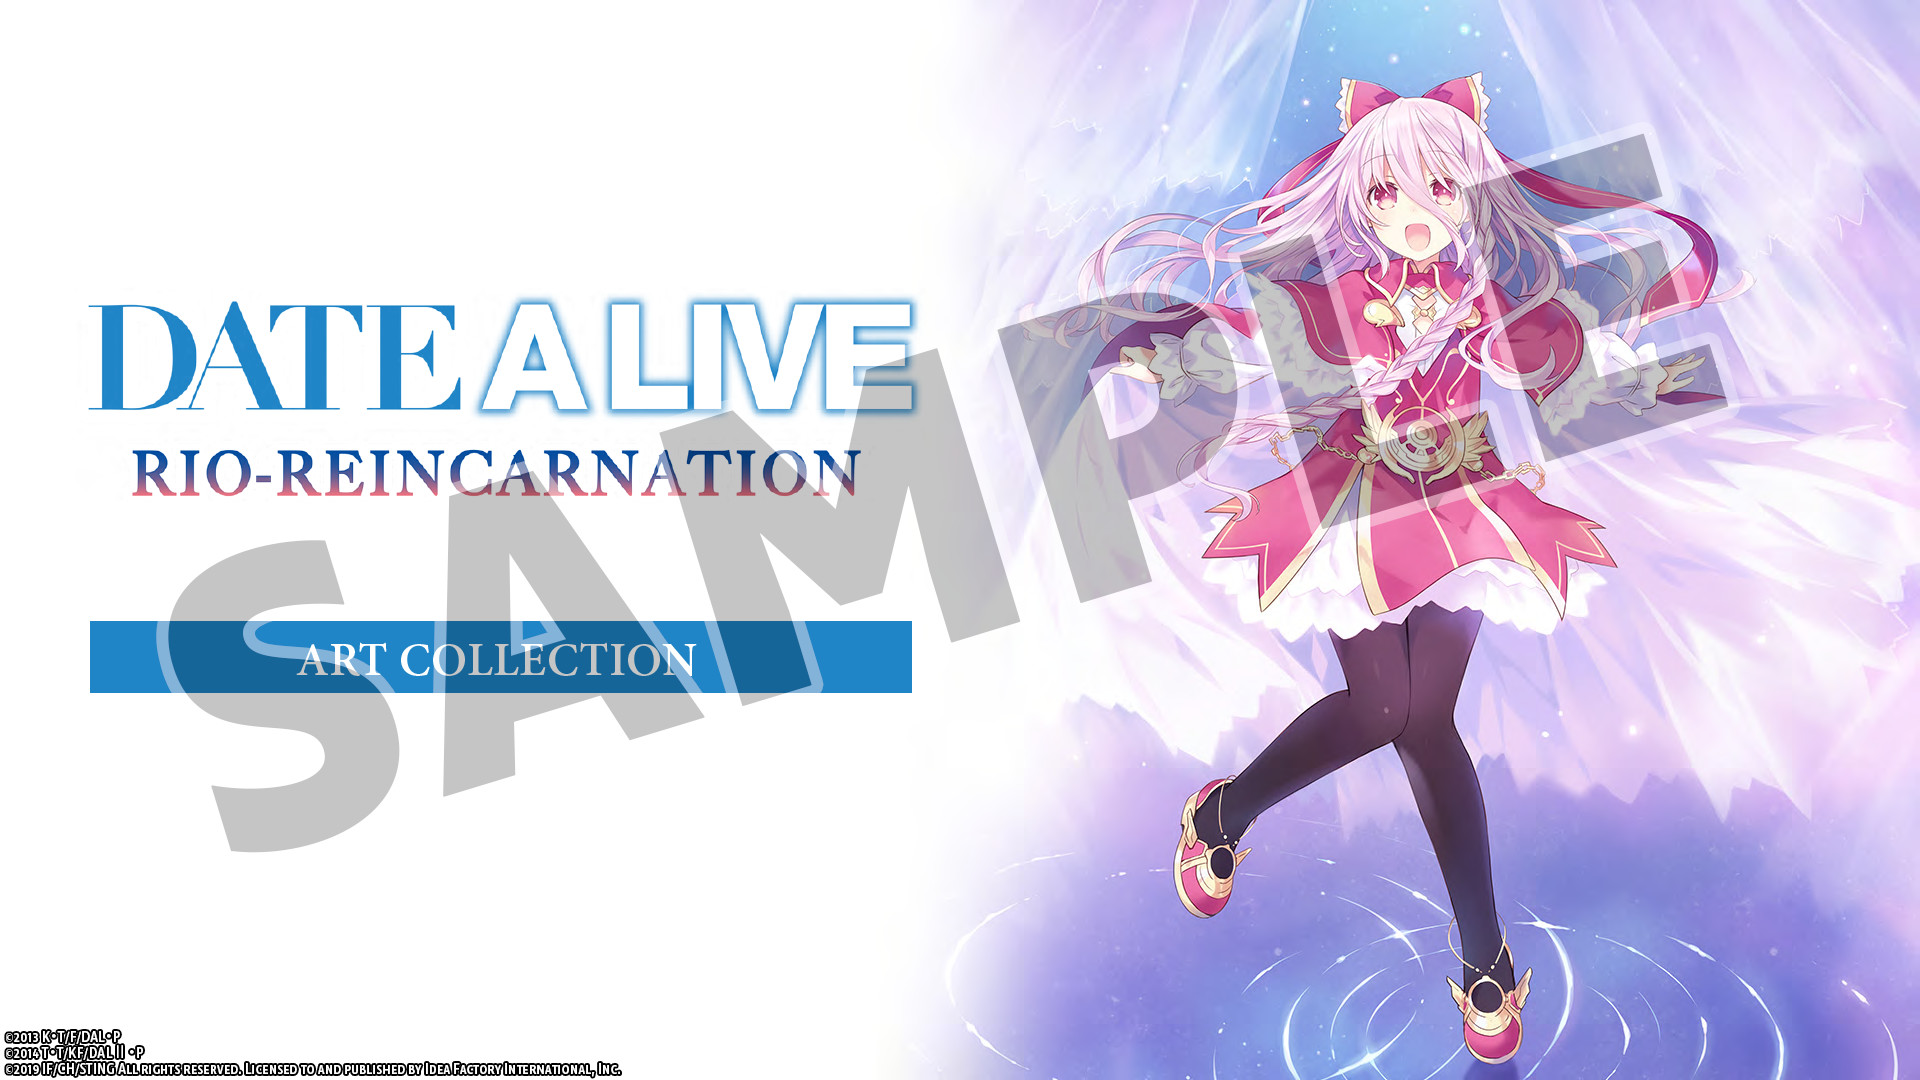 DATE A LIVE Rio Reincarnation - Deluxe Pack DLC Steam CD Key 6.42 $